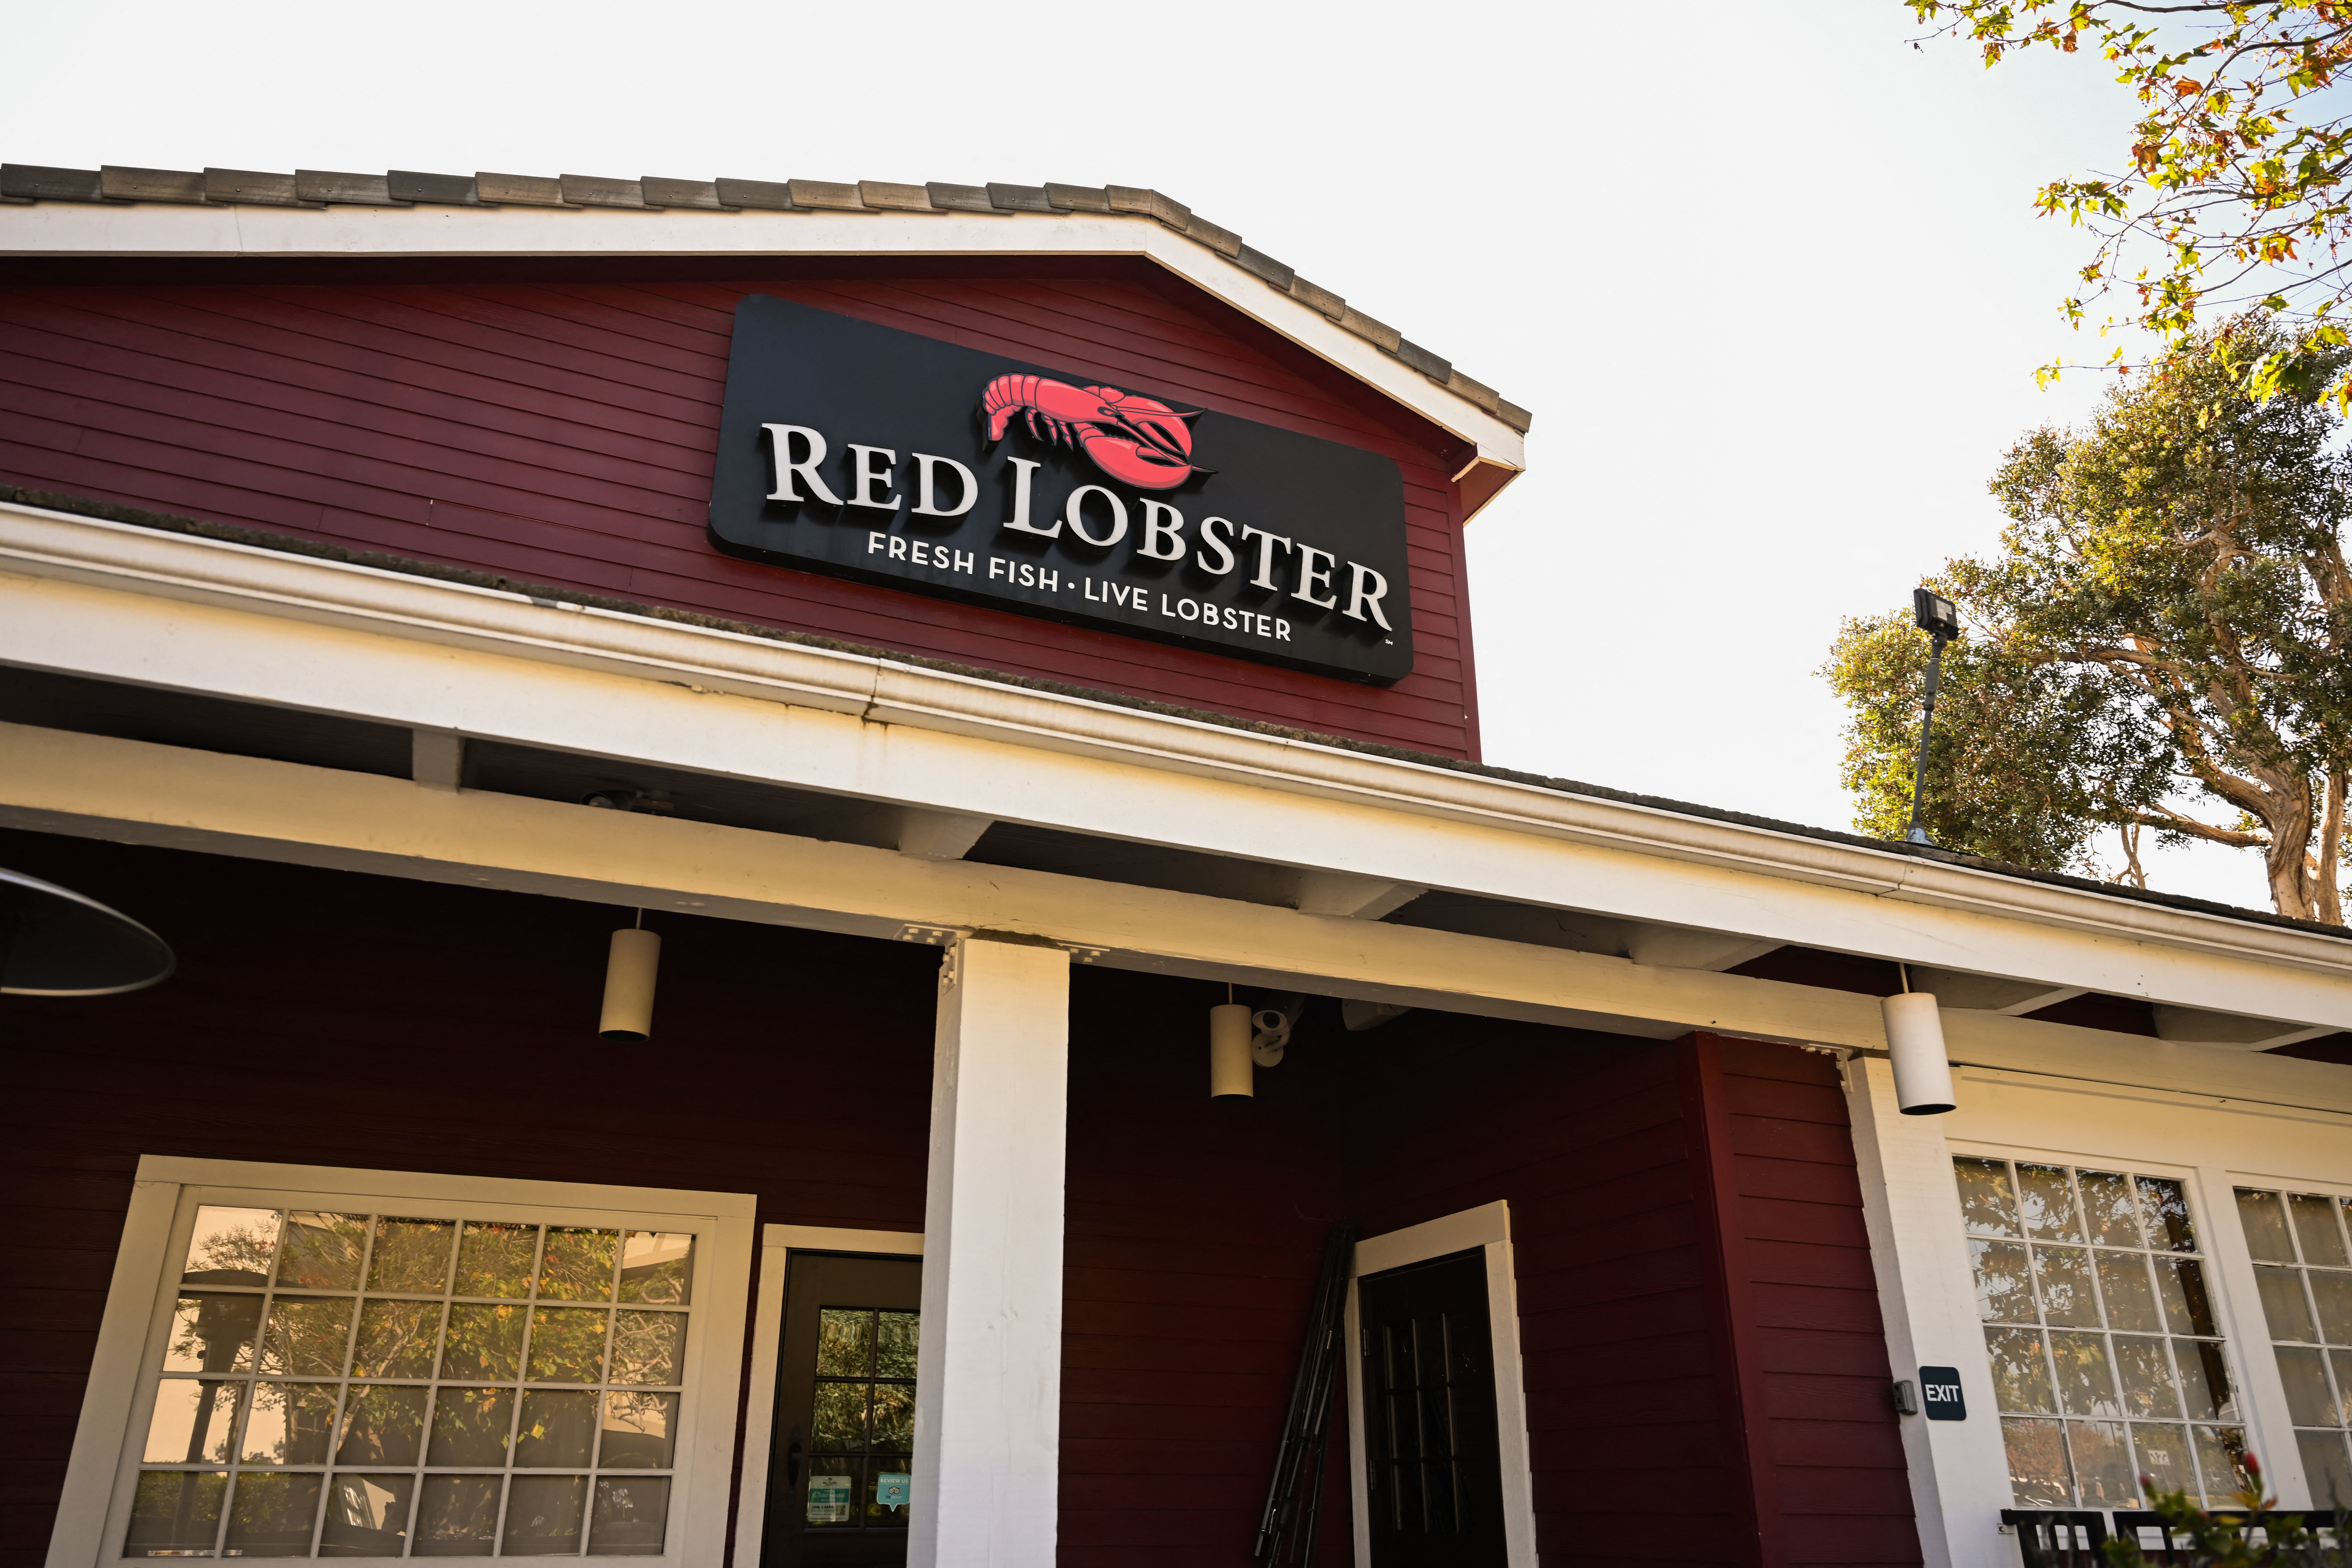 American seafood chain Red Lobster, pictured above in Torrance, California, is closing down and auctioning off equipment from more than 50 locations